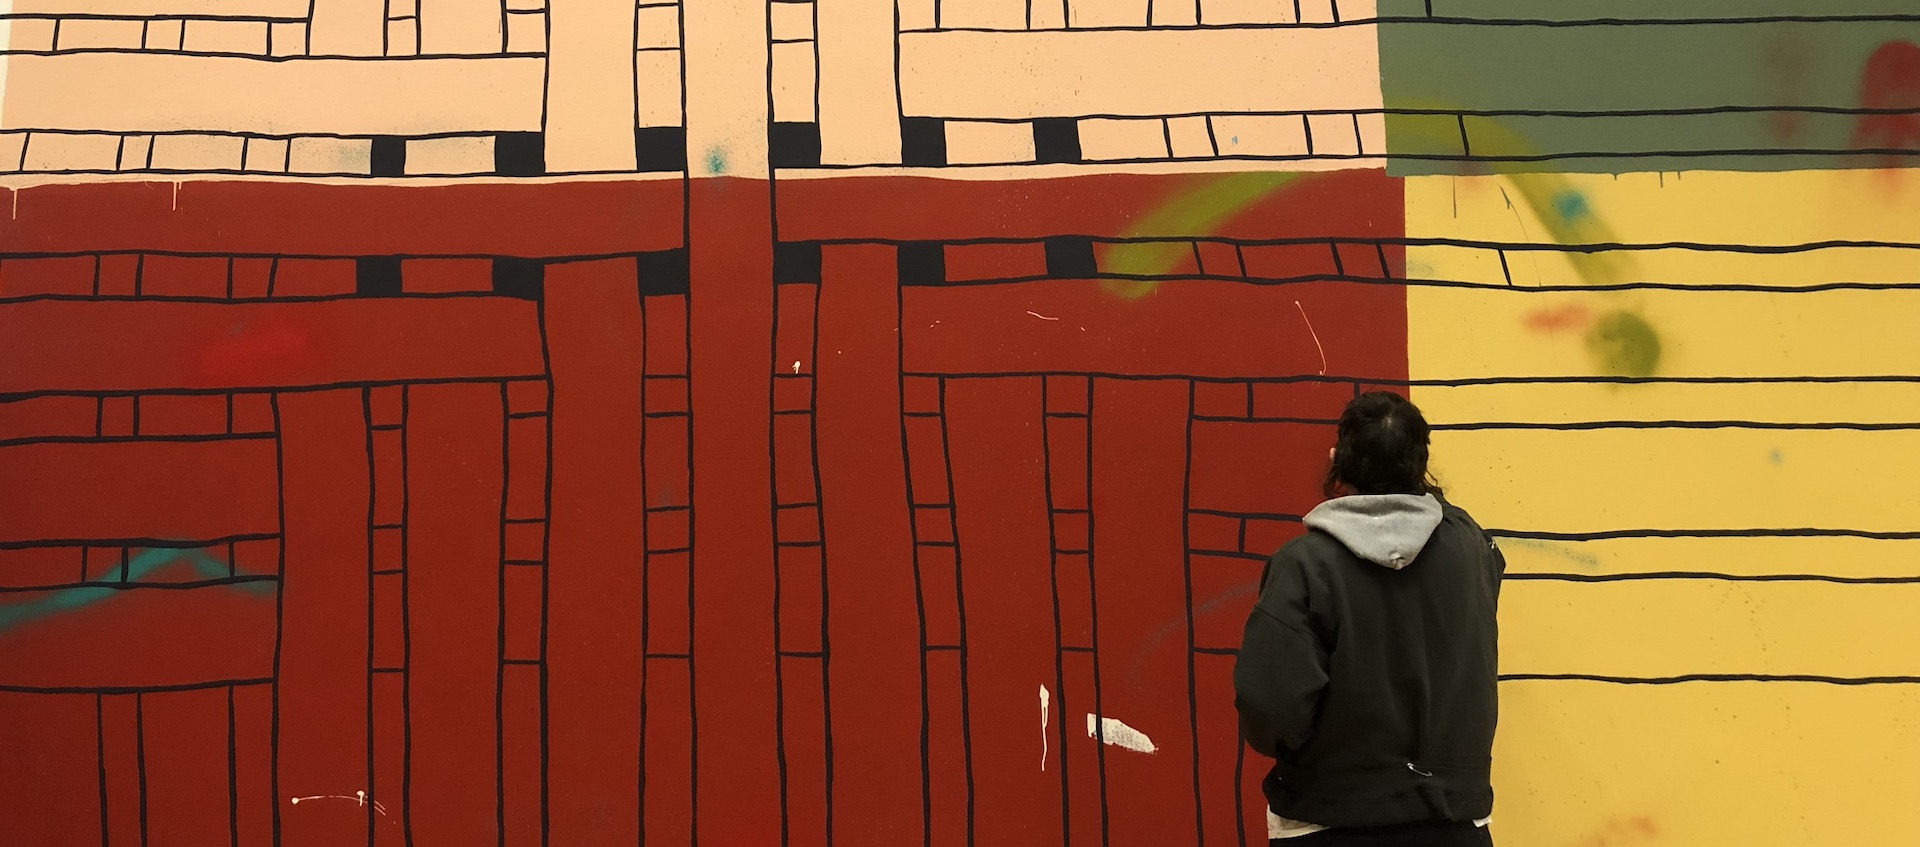 Artists Alicia McCarthy works on the site-specific mural No Straight Lines at the Wexner Center for the Arts at The Ohio State University